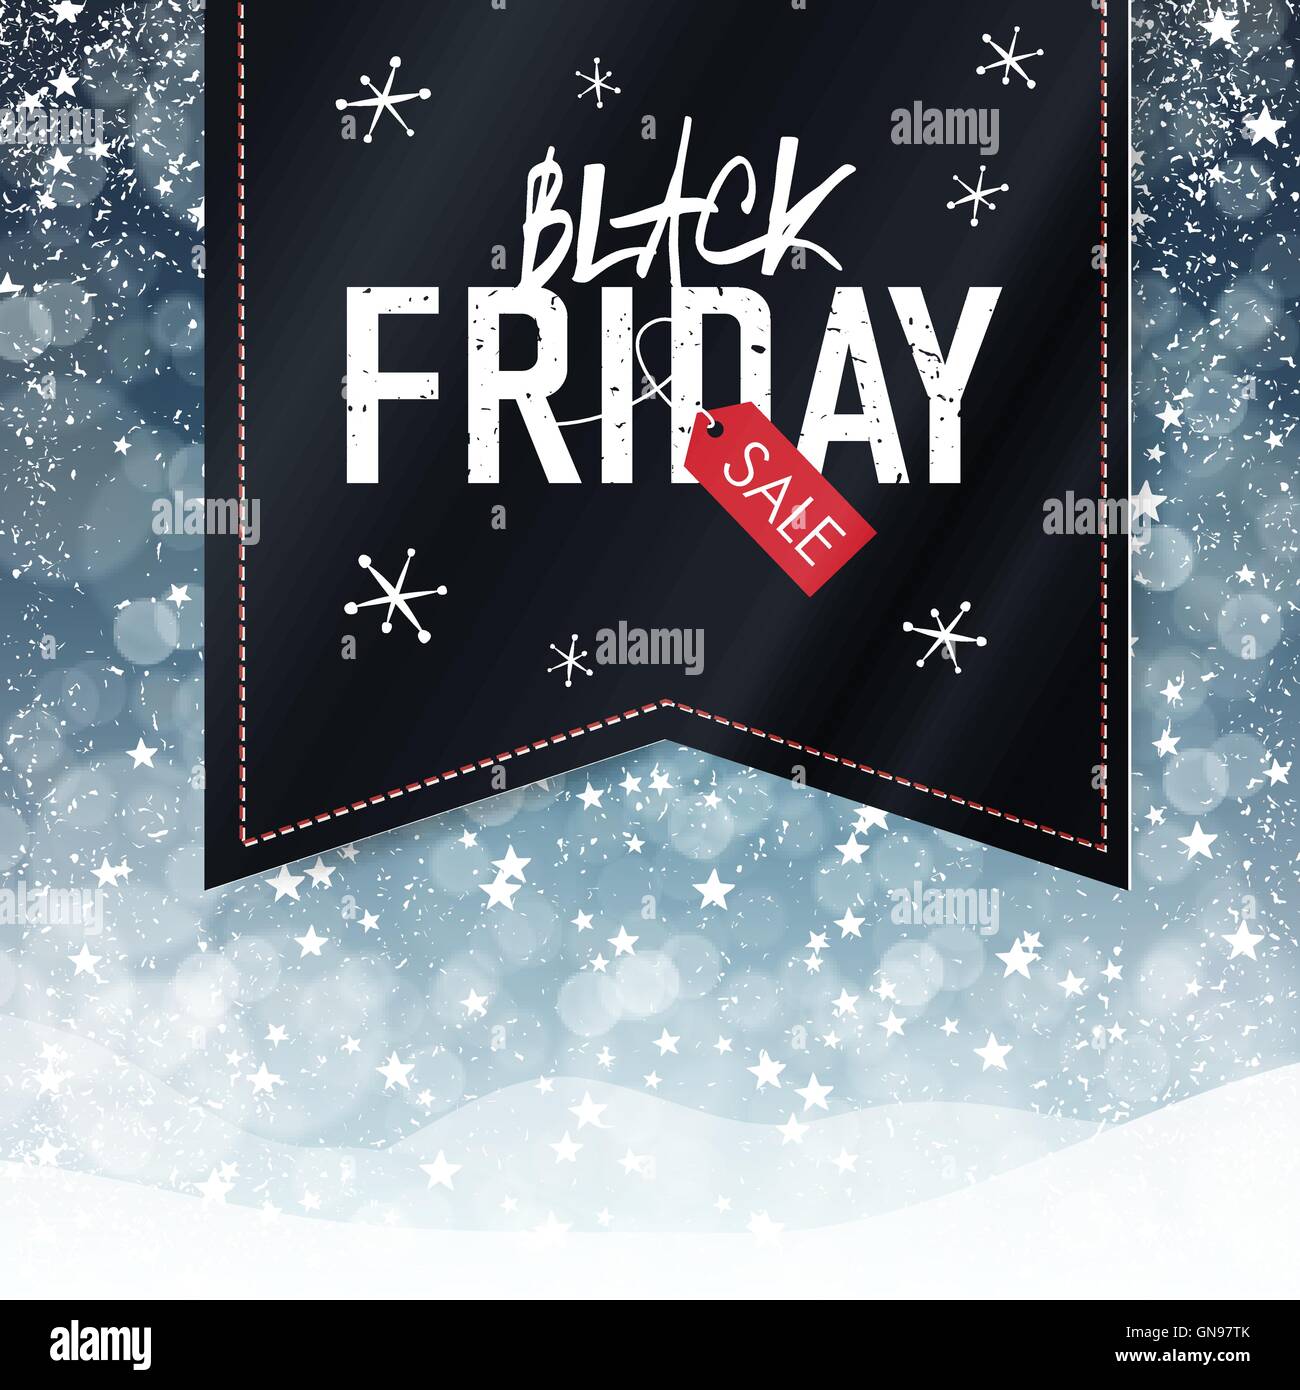 Black Friday sales Advertising Poster with Snow Fall Background. Stock Vector